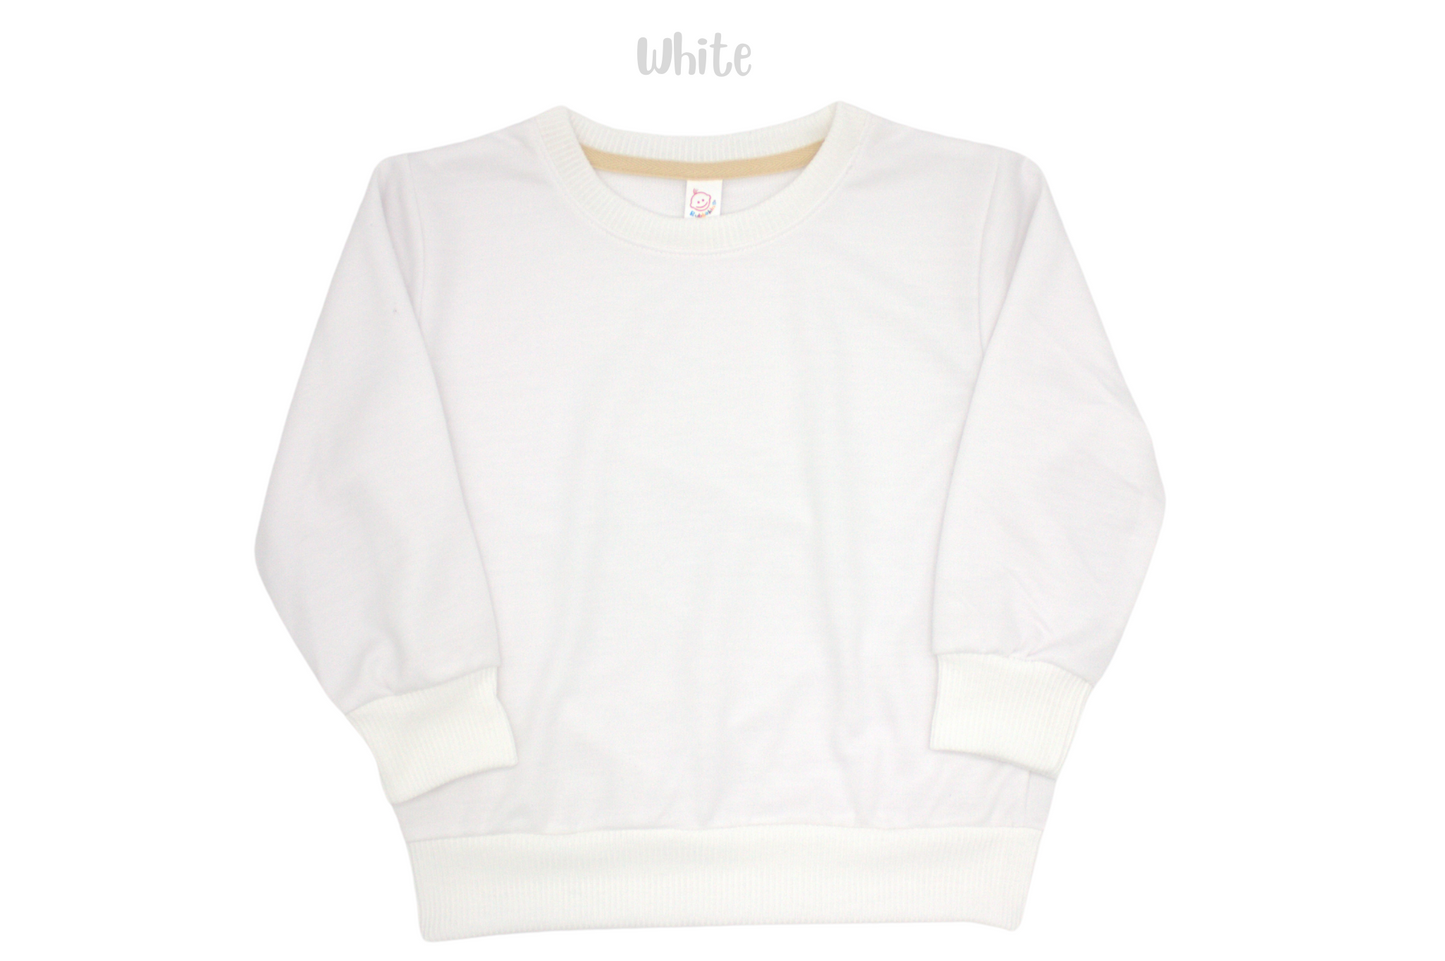 YOUTH, TODDLER & INFANT 100% Polyester SWEATSHIRT